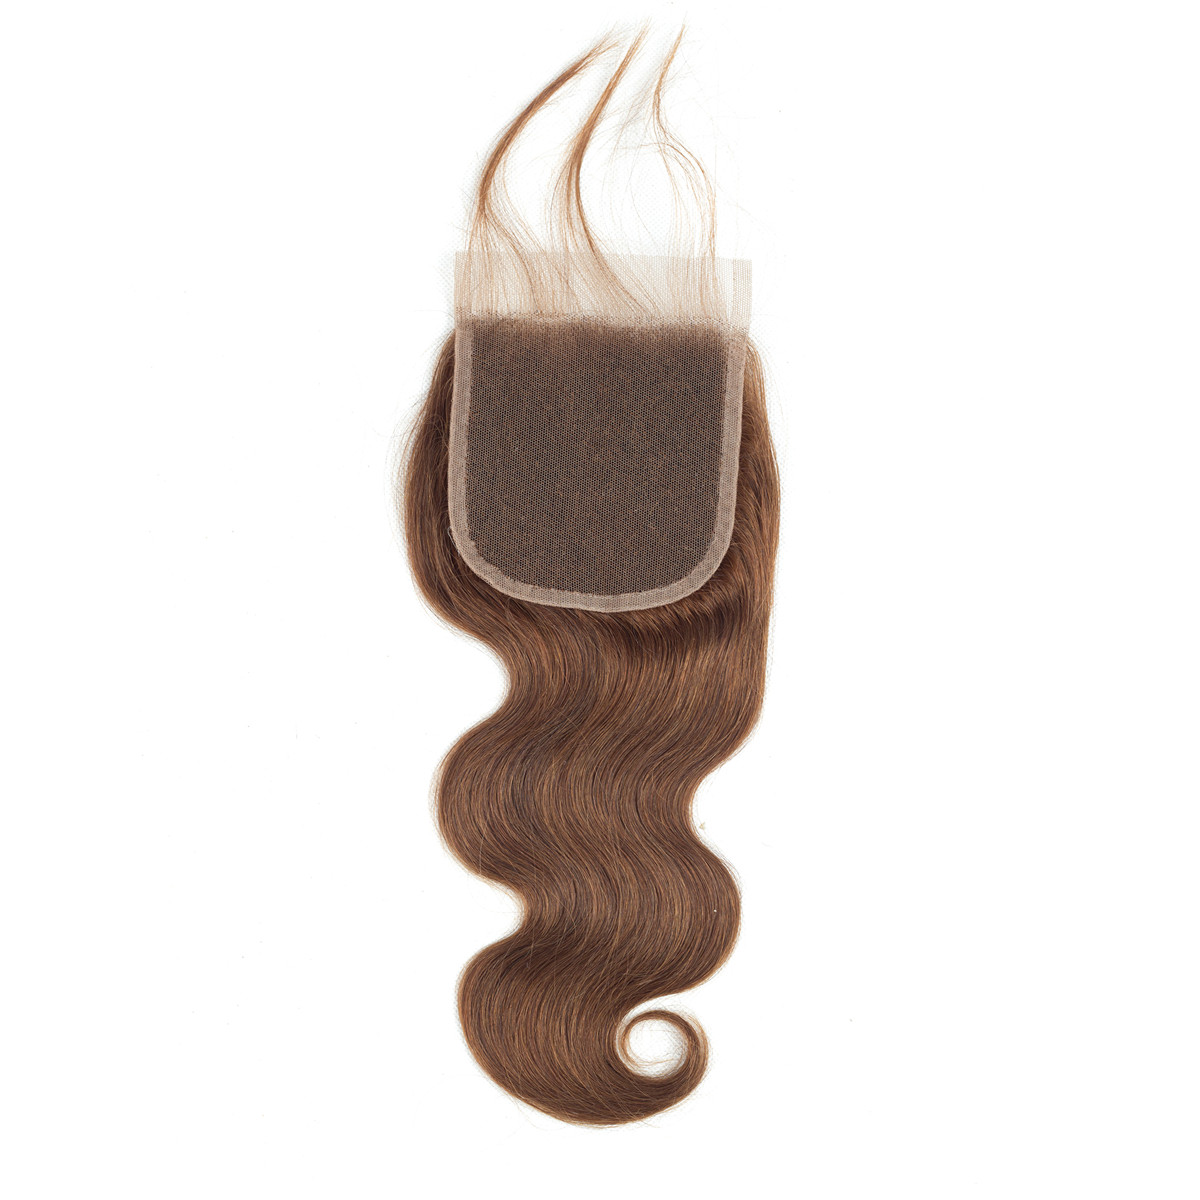 Wigsbuy #4 Lace Closure Body Wave Human Hair 4 x 4 Closure With Baby Hair